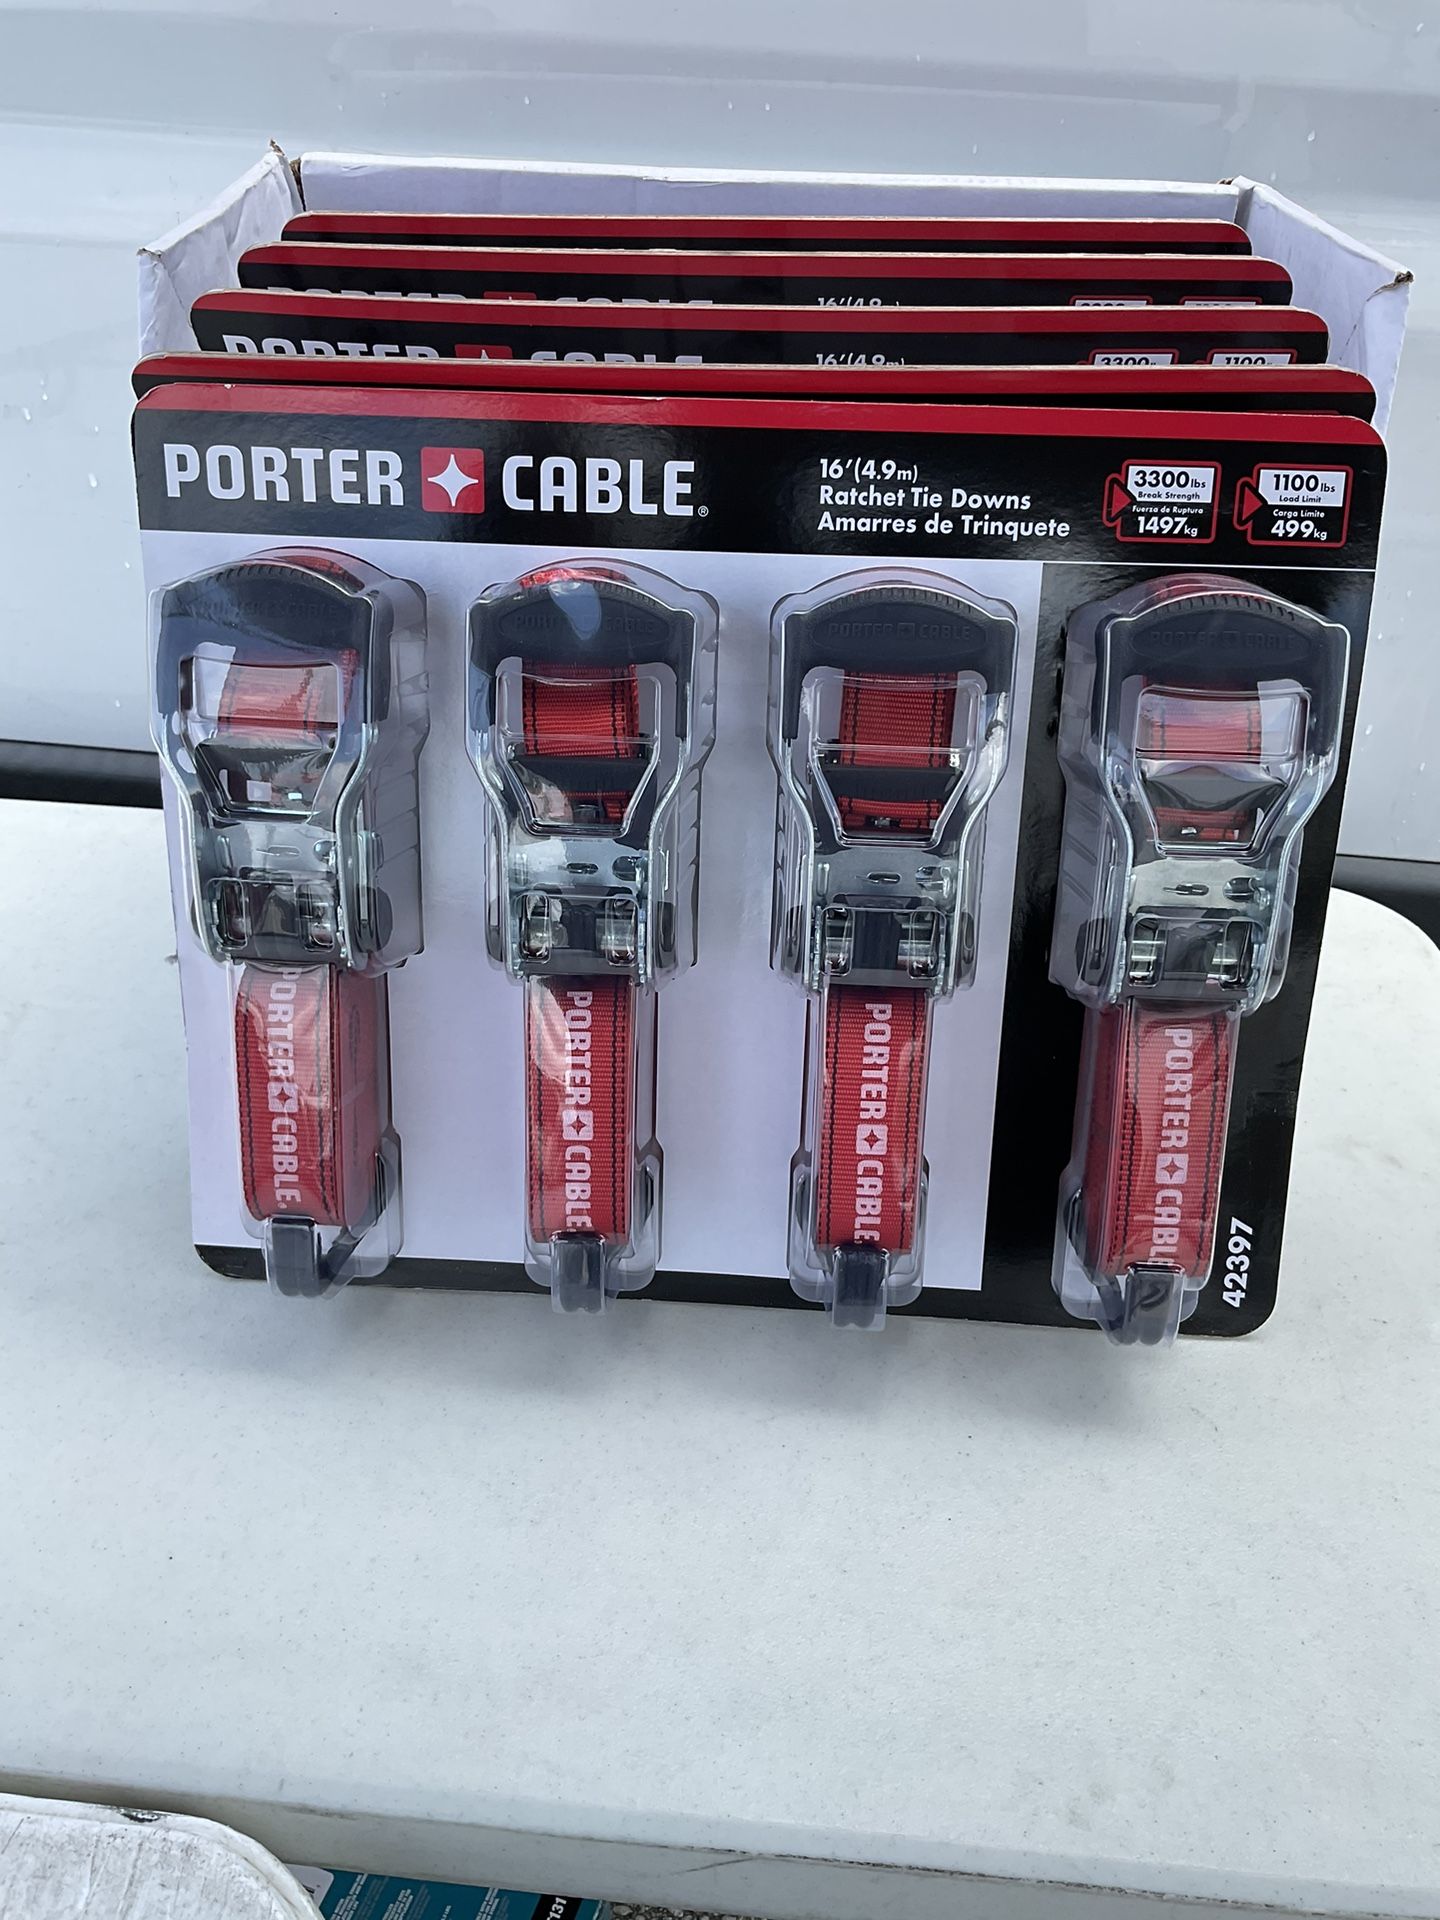 Porter Cable. 16’ Ratchet Tie Down (4-Pack).